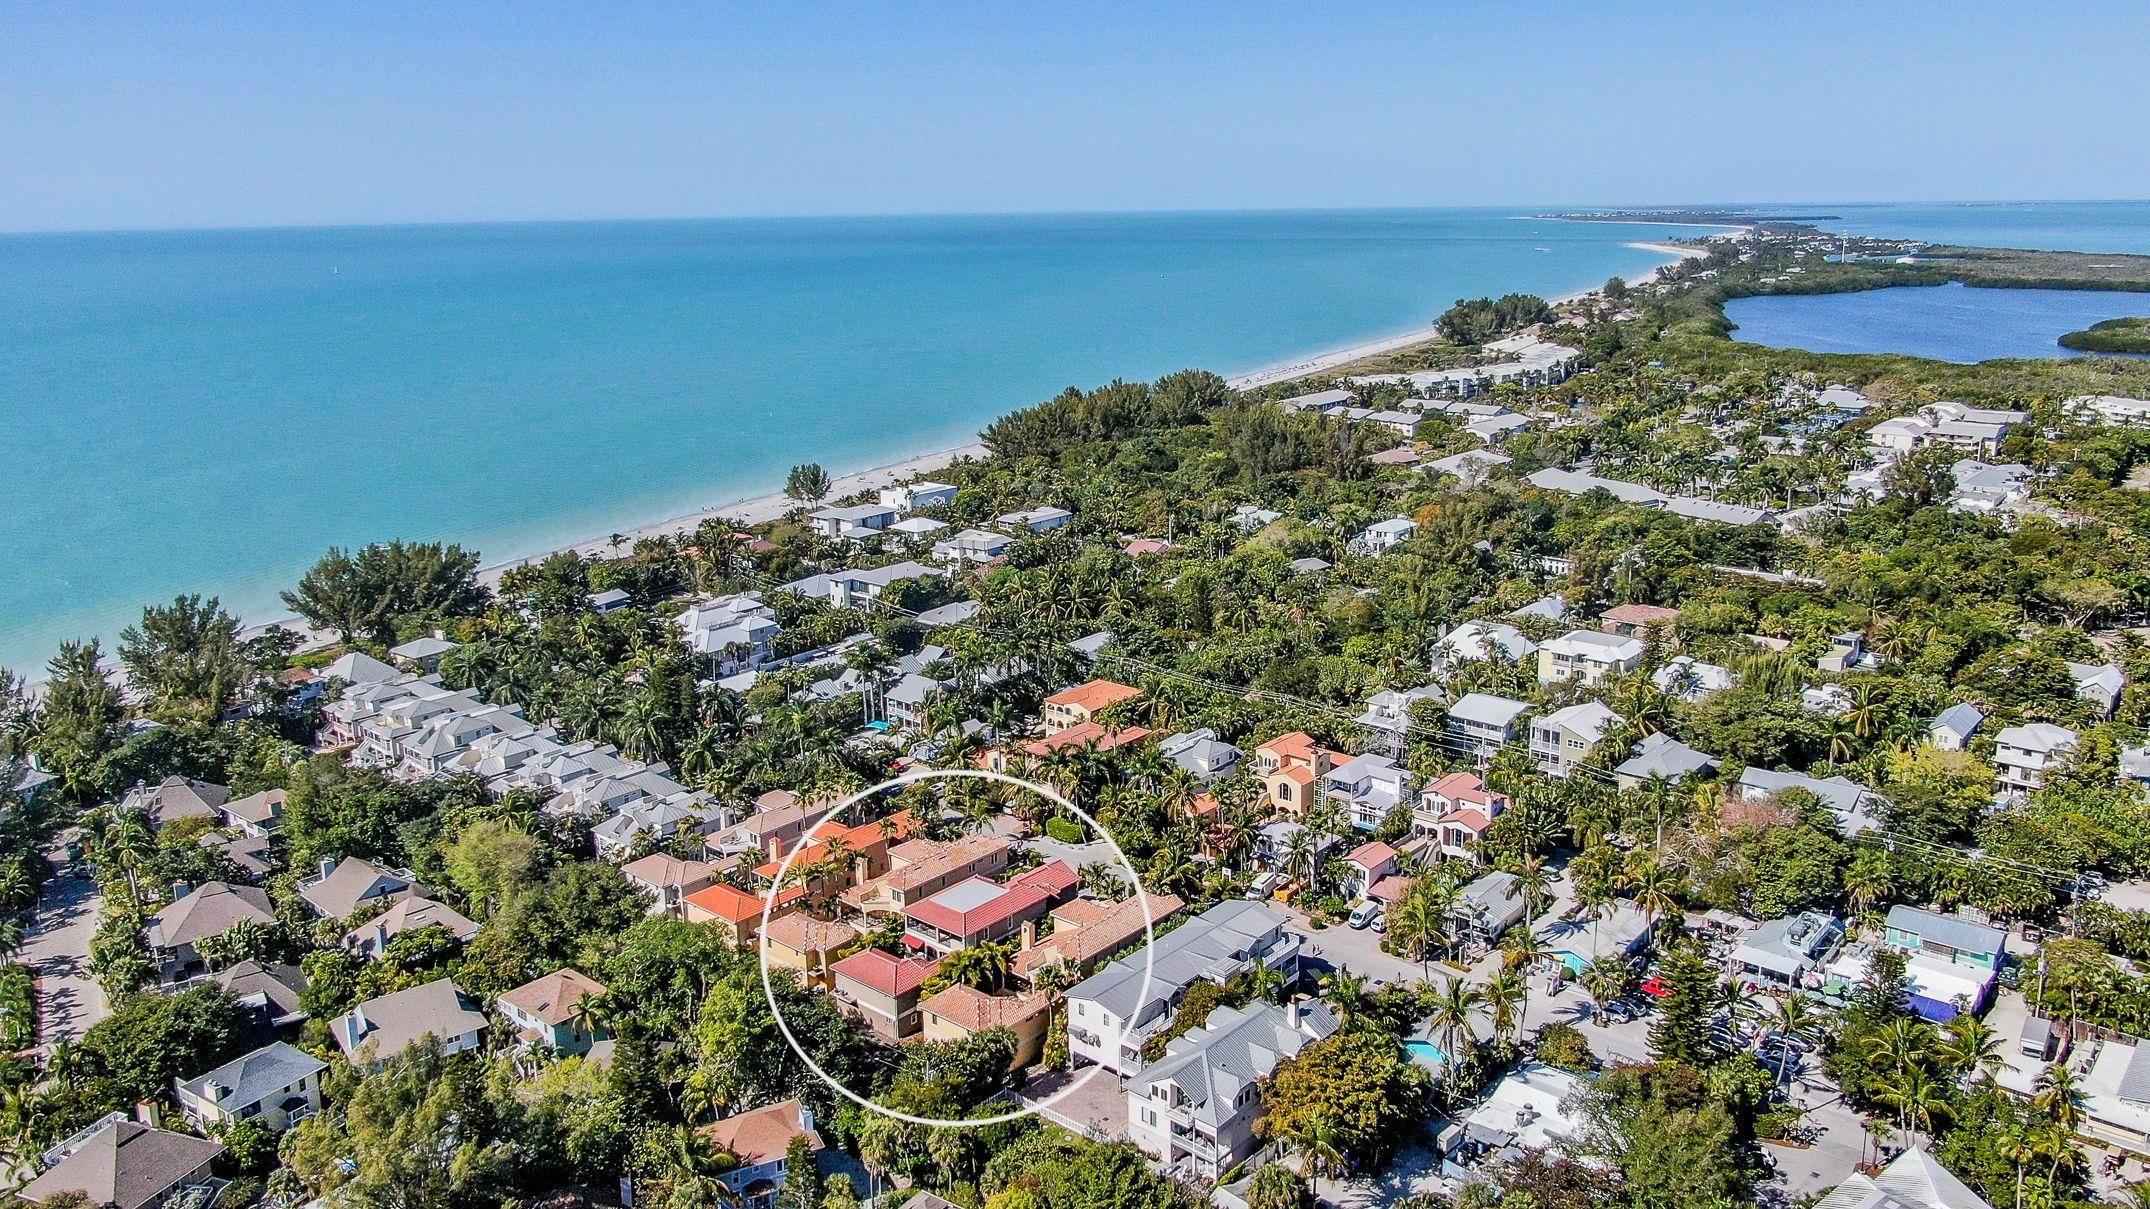 11517 Andy Rosse Ln, Captiva, Florida 33924, 4 Bedrooms Bedrooms, ,4 BathroomsBathrooms,Residential,For Sale,Andy Rosse Ln,2220122